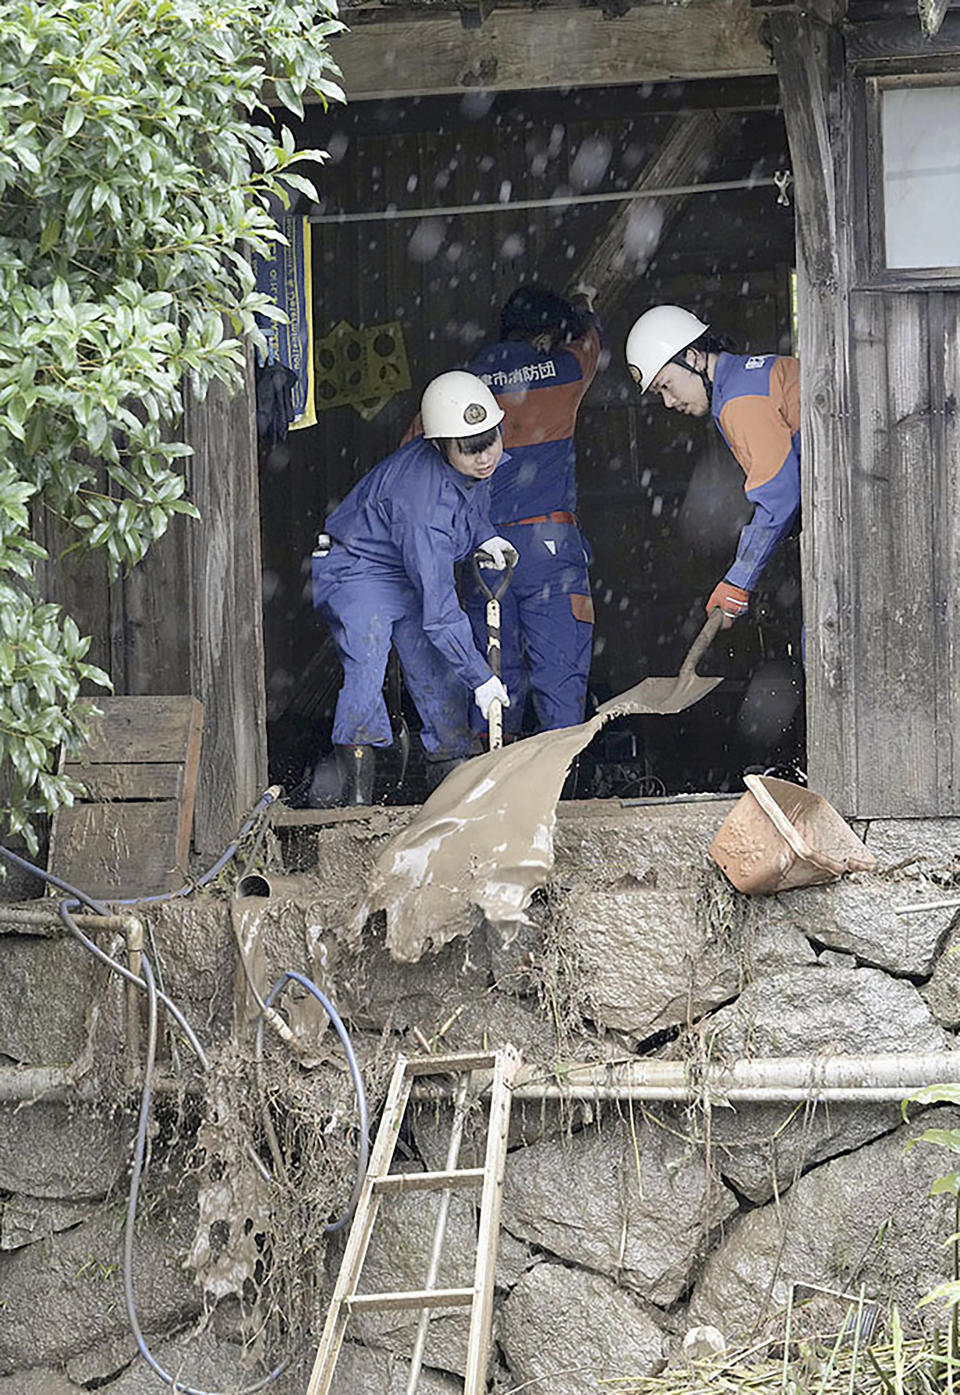 Firefighters scoop out the mud from a house damaged by a landslide in Karatsu, Saga prefecture, southern Japan Monday, July 10, 2023. Torrential rain has been pounding southwestern Japan, triggering floods and mudslides. (Kyodo News via AP)